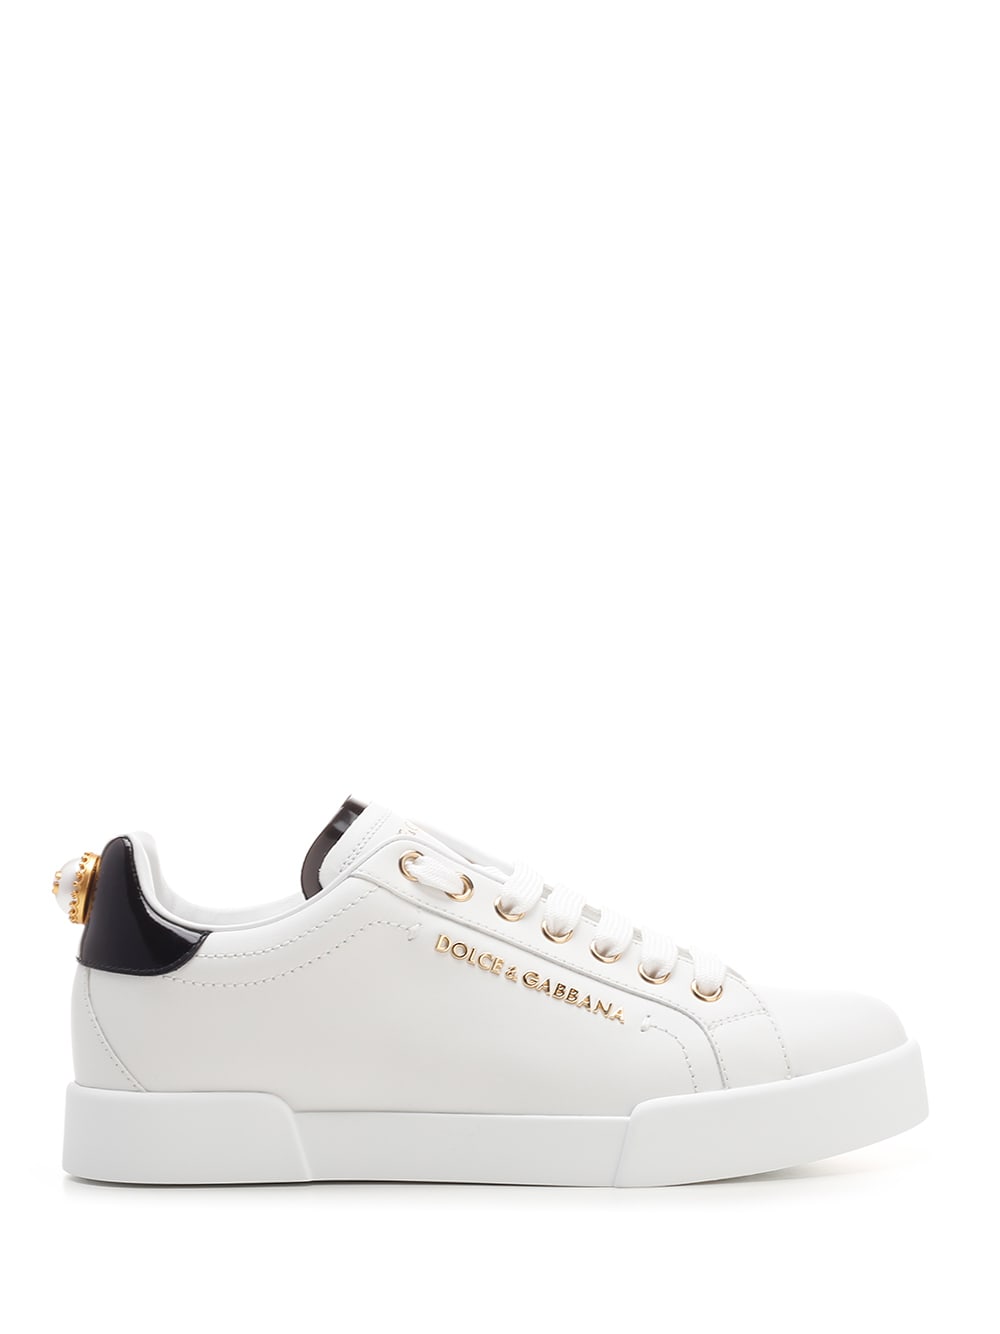 DOLCE & GABBANA EMBELLISHED SNEAKERS